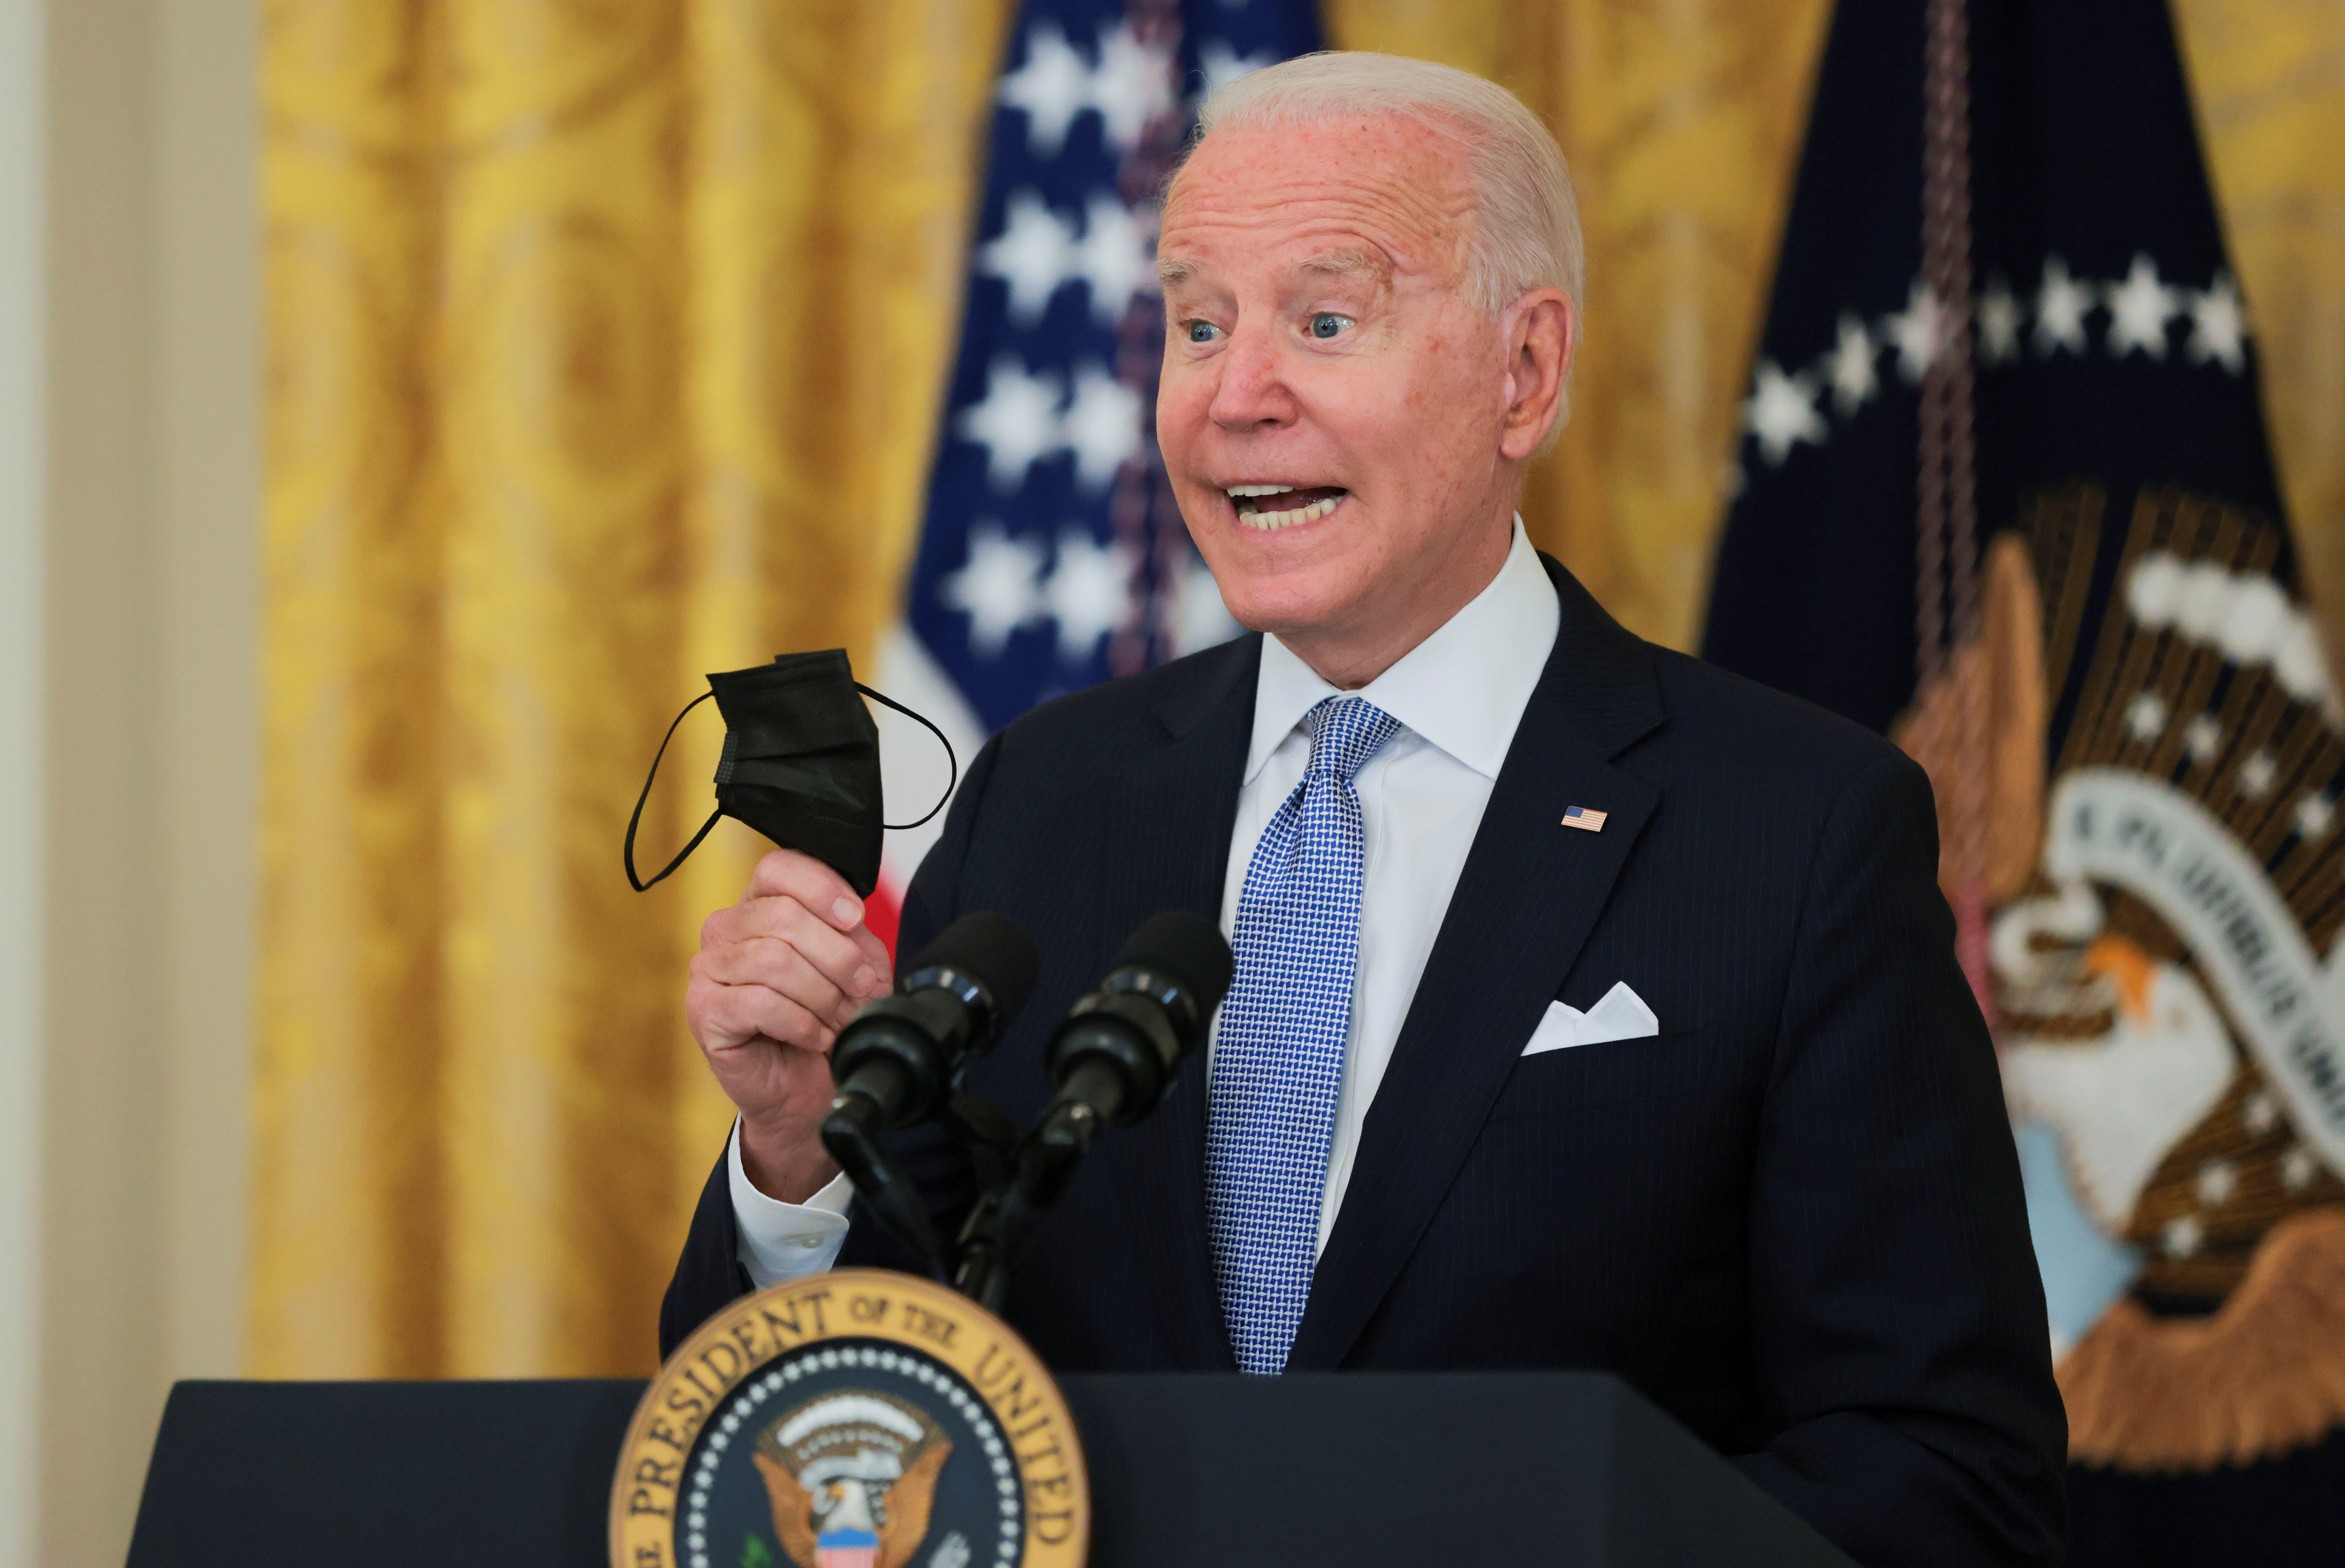 U.S. President Joe Biden speaks about the pace of coronavirus disease (COVID-19) vaccinations during remarks at the White House in Washington